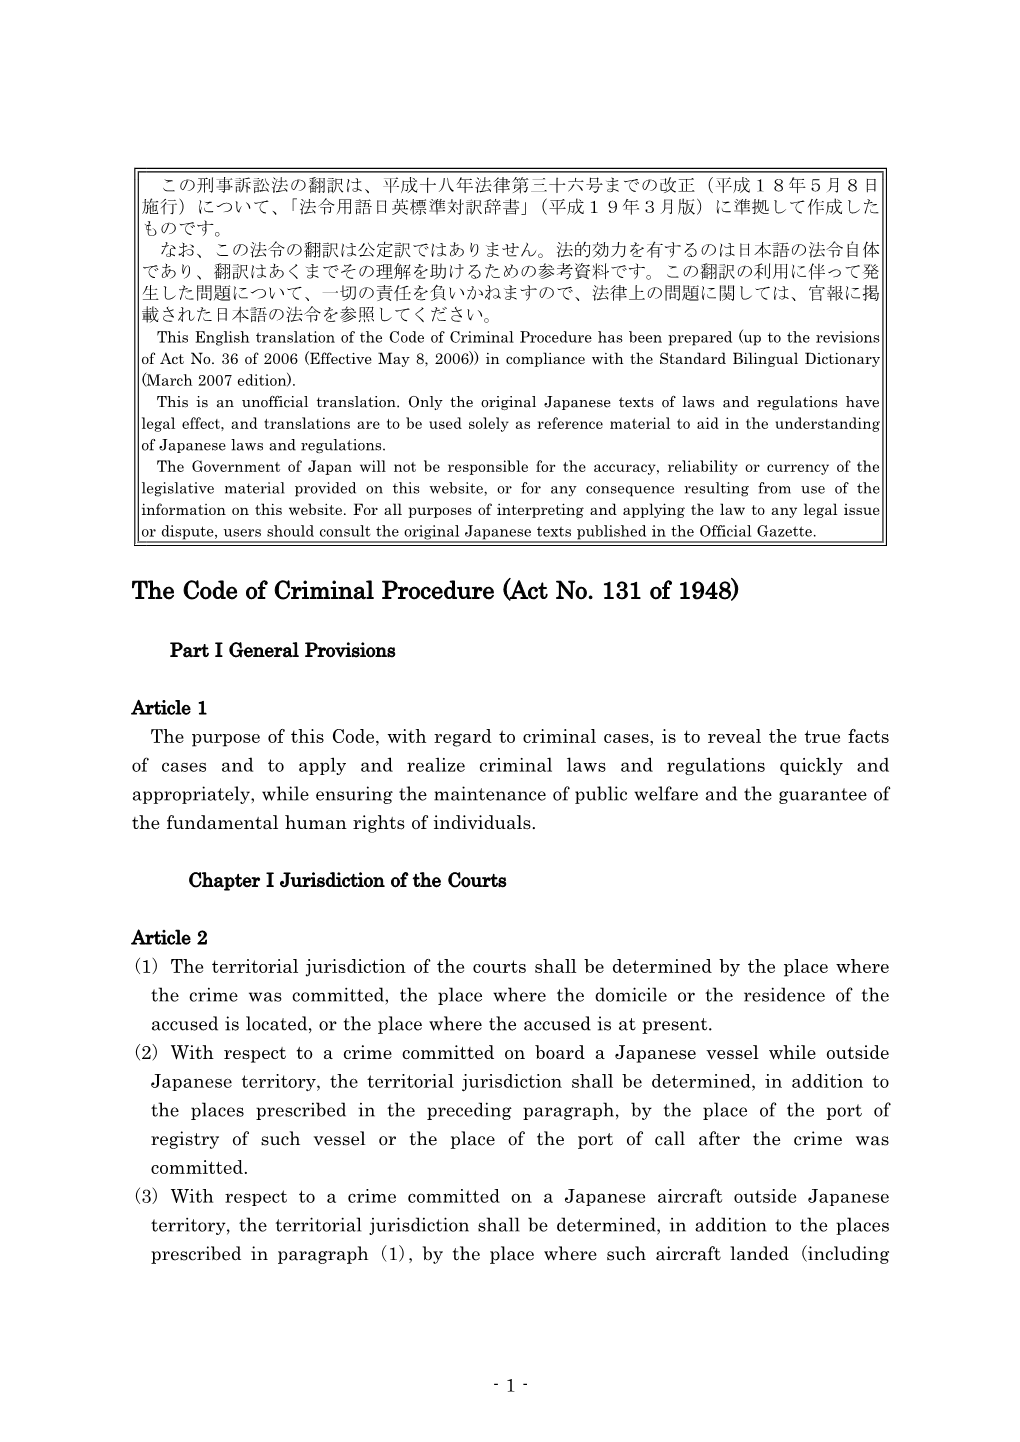 The Code of Criminal Procedure Has Been Prepared (Up to the Revisions of Act No